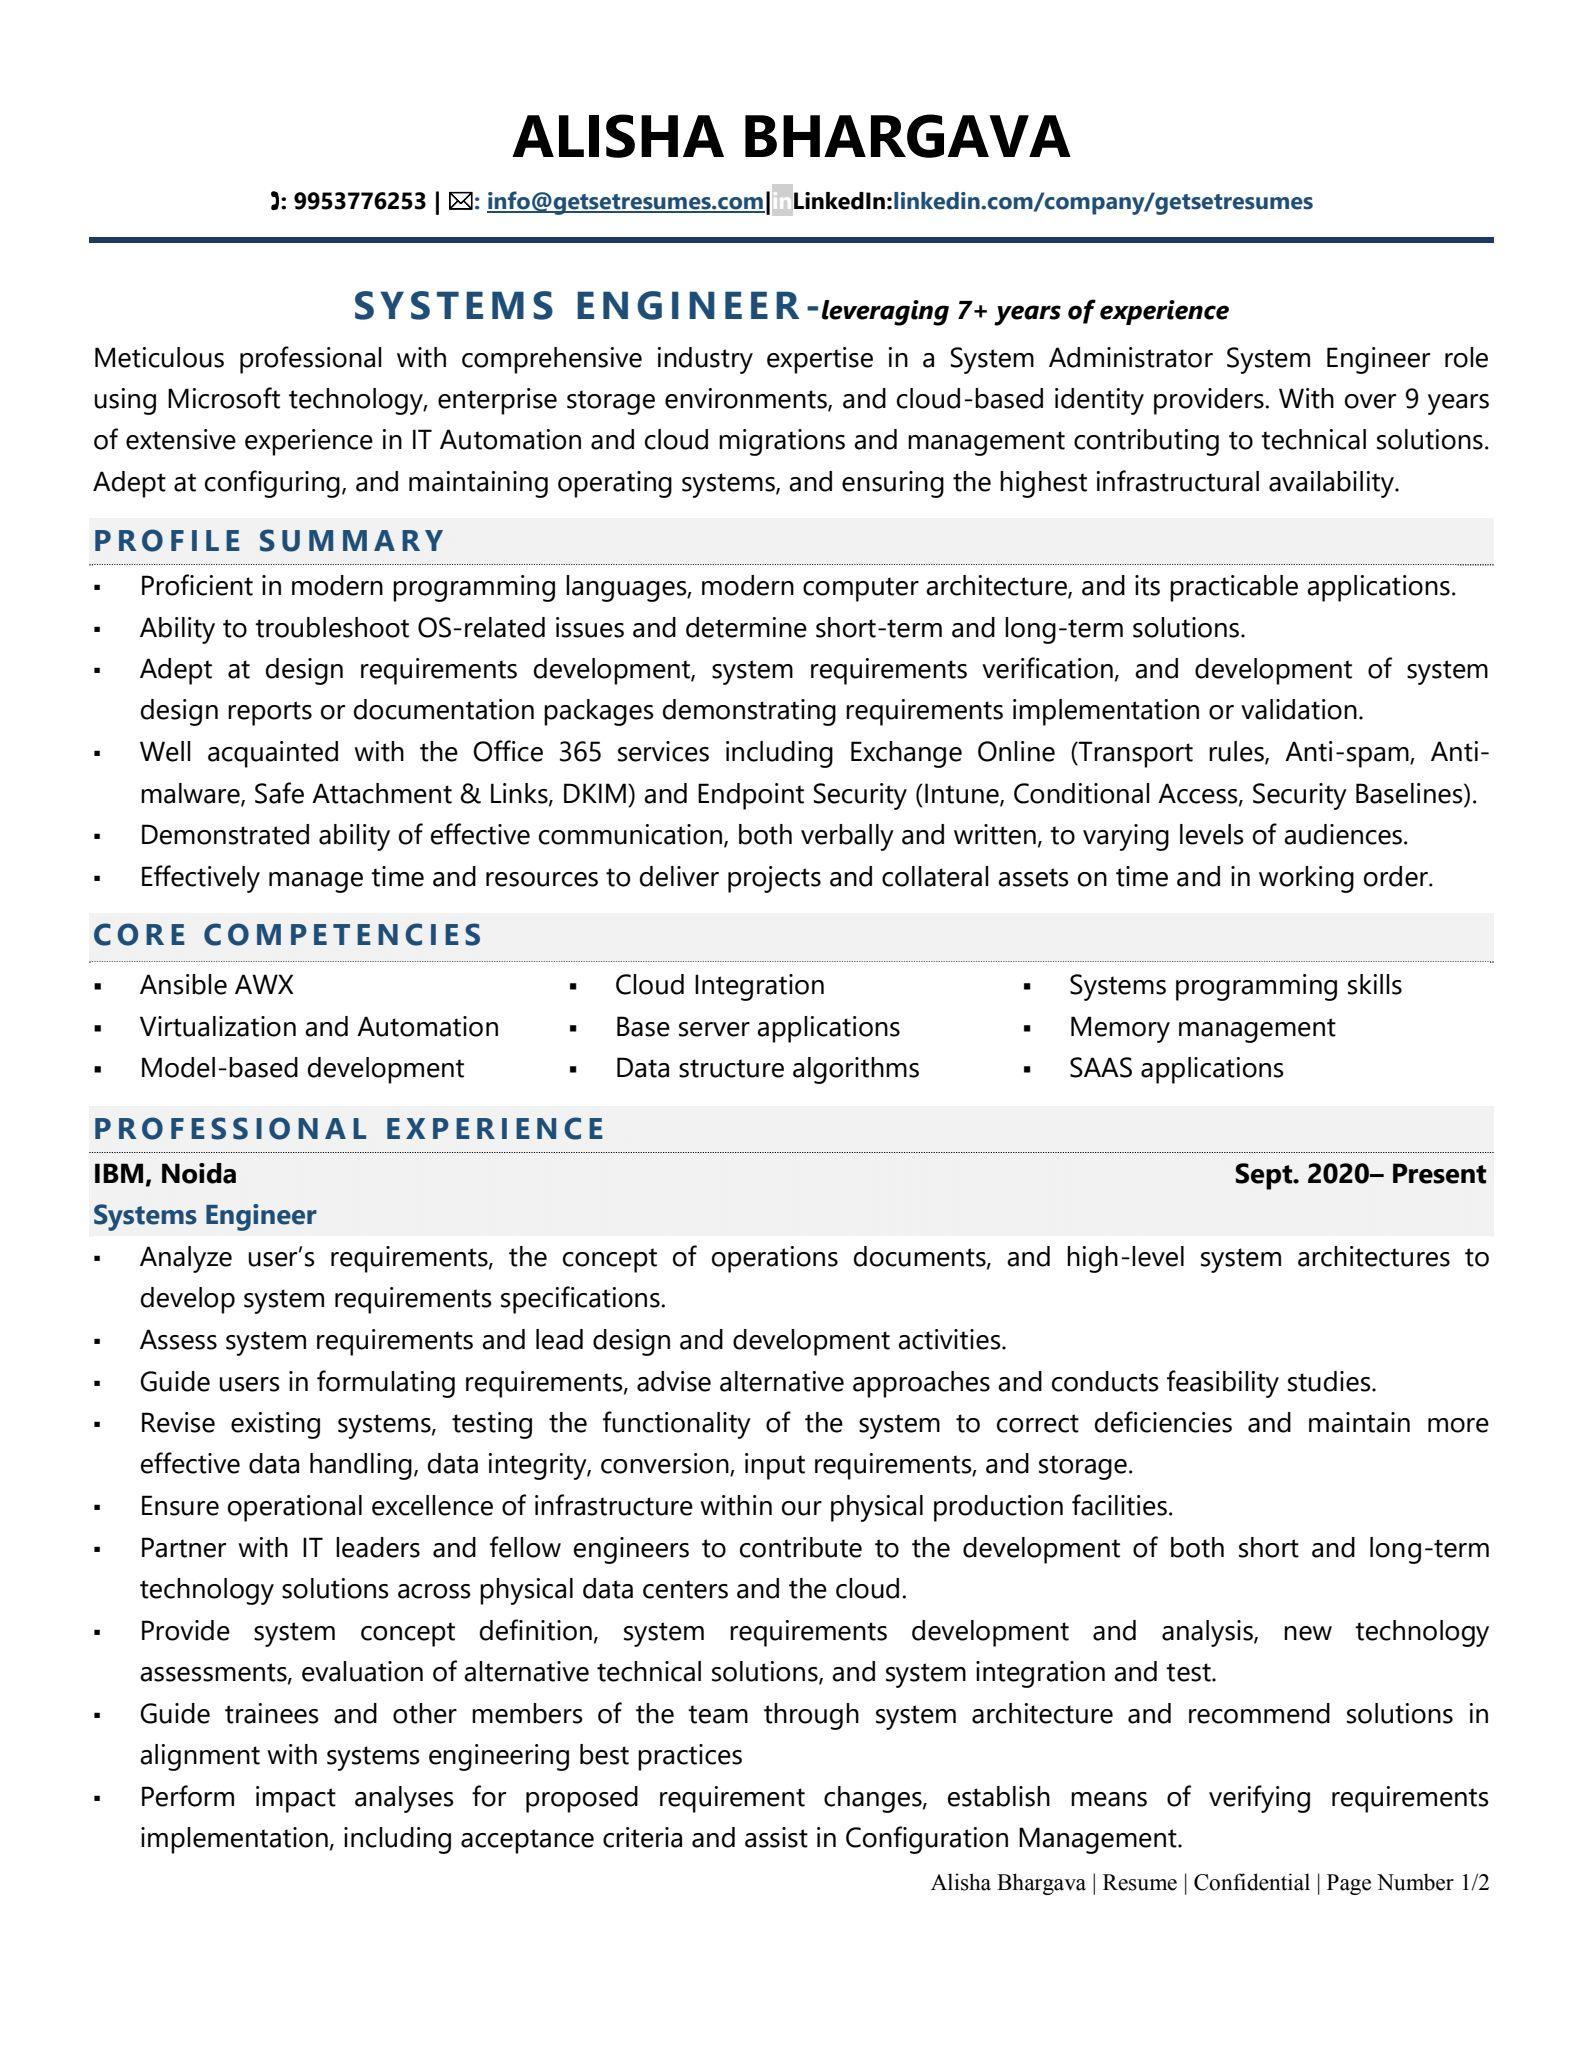 Systems Engineer - Resume Example & Template